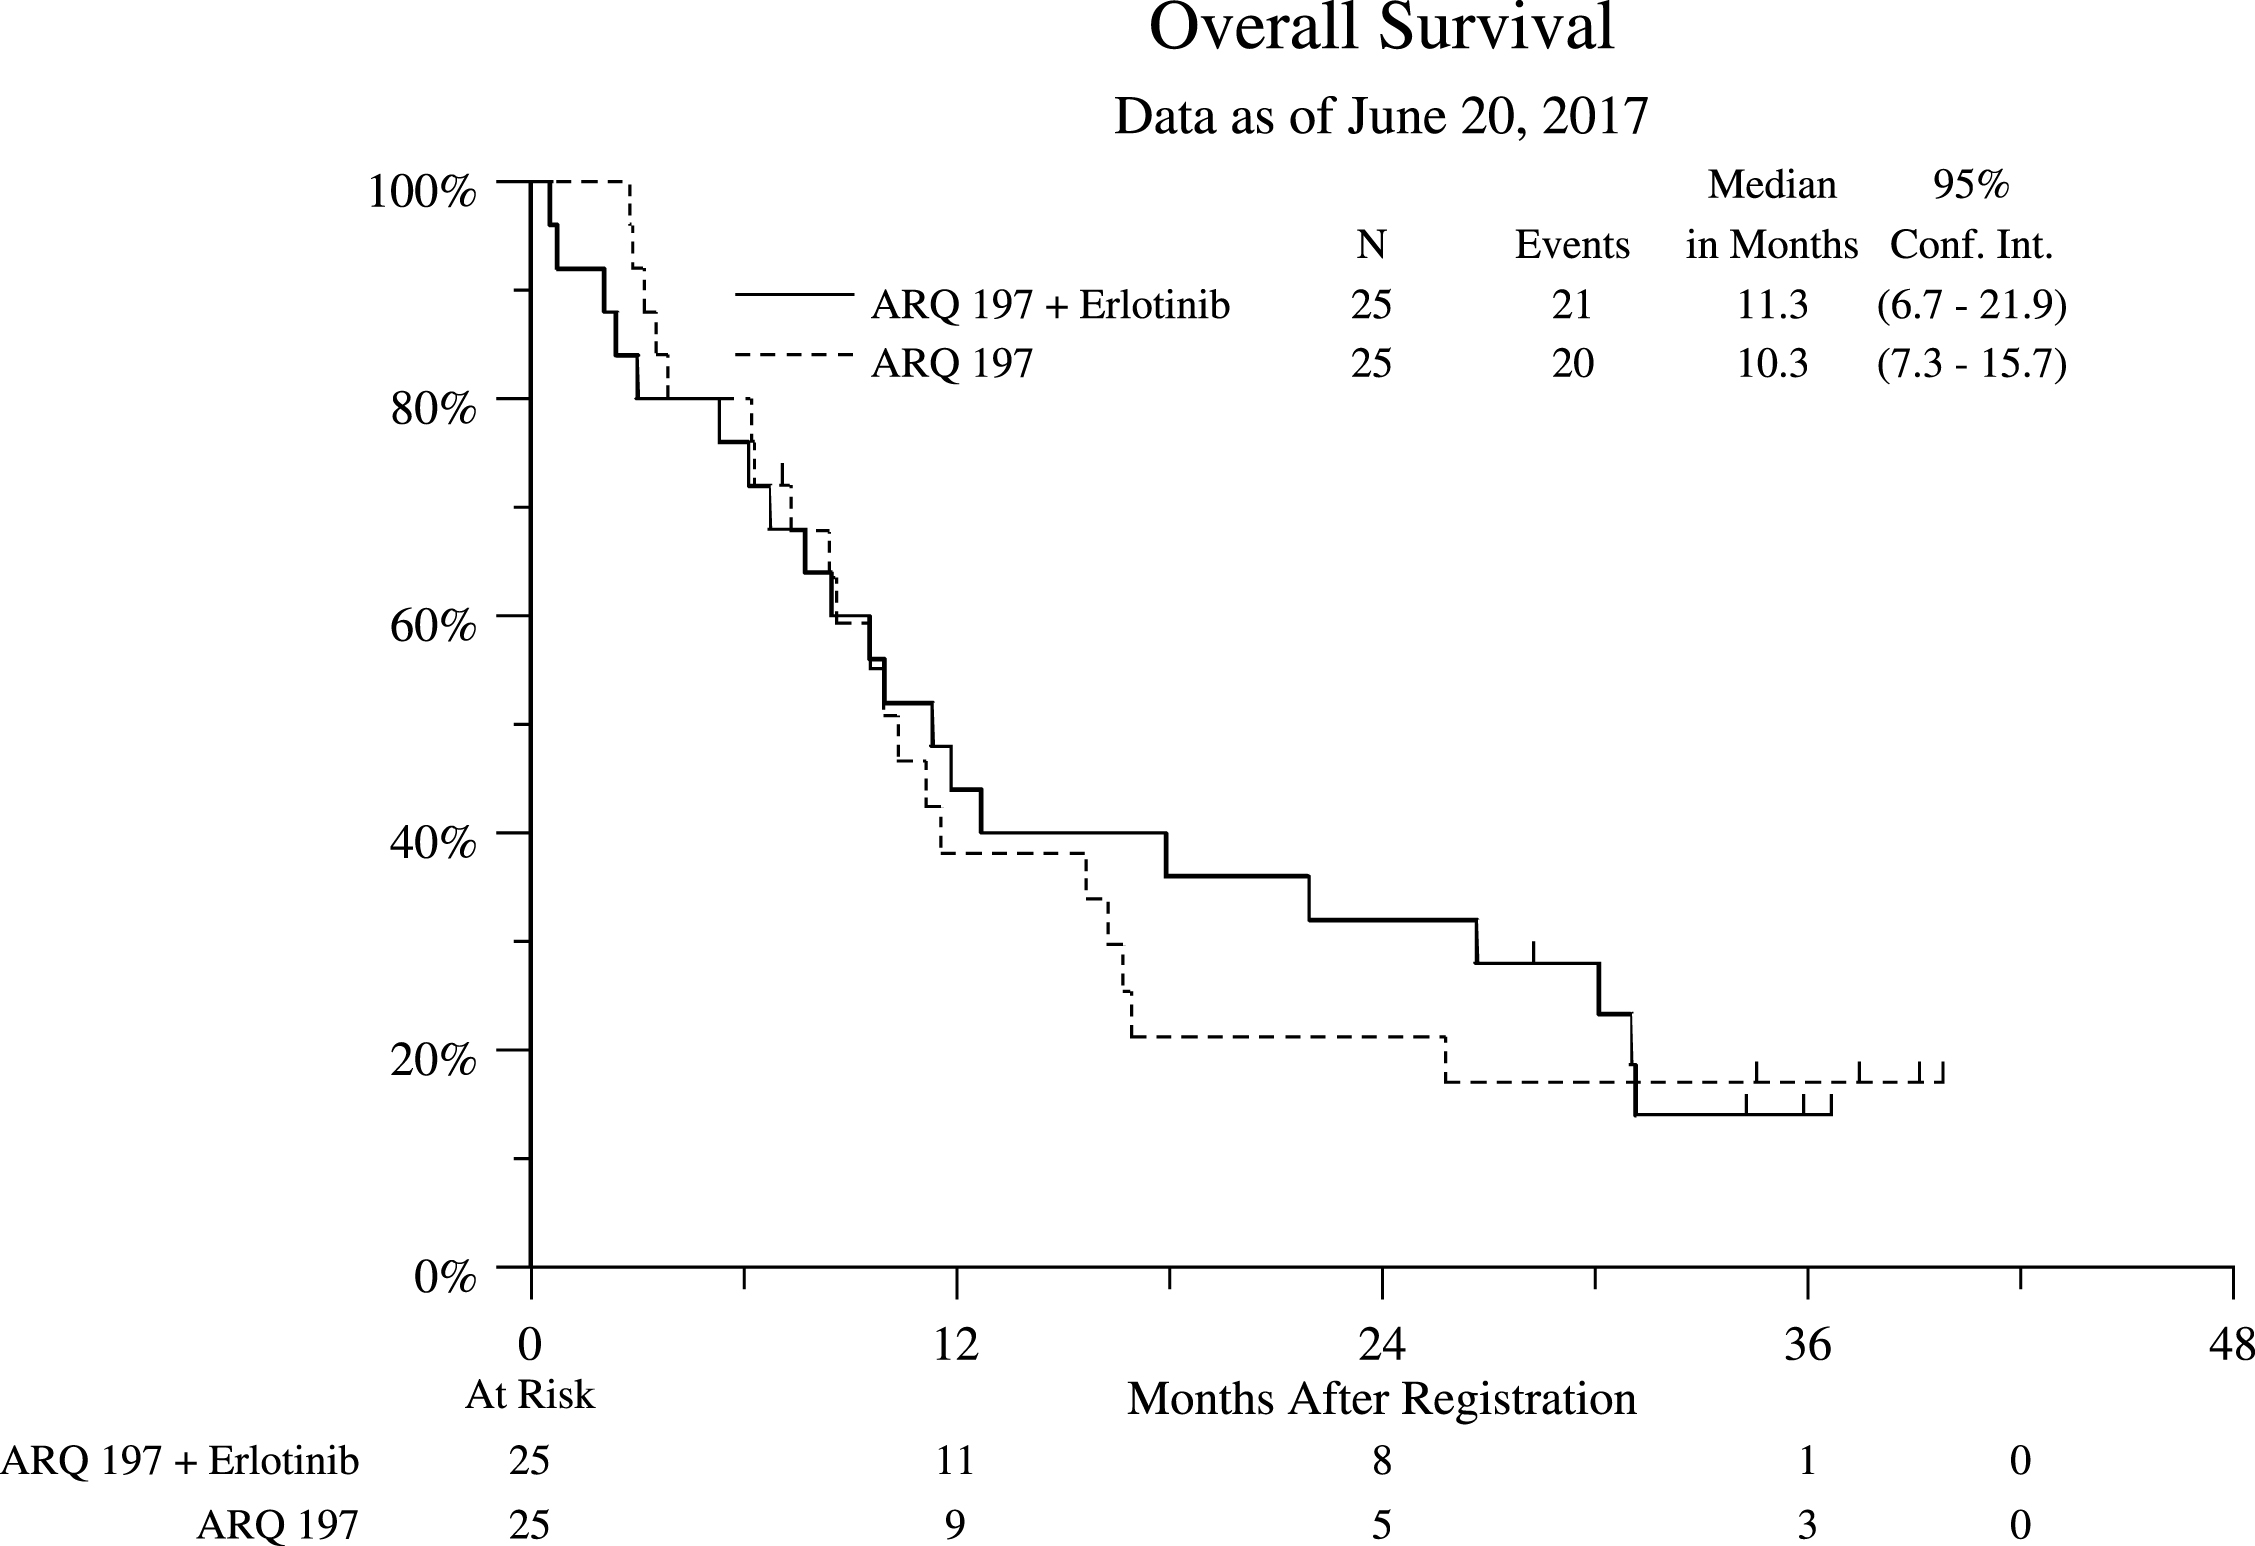 Overall Survival (OS) Stratified by Treatment Arm for All Eligible Patients.